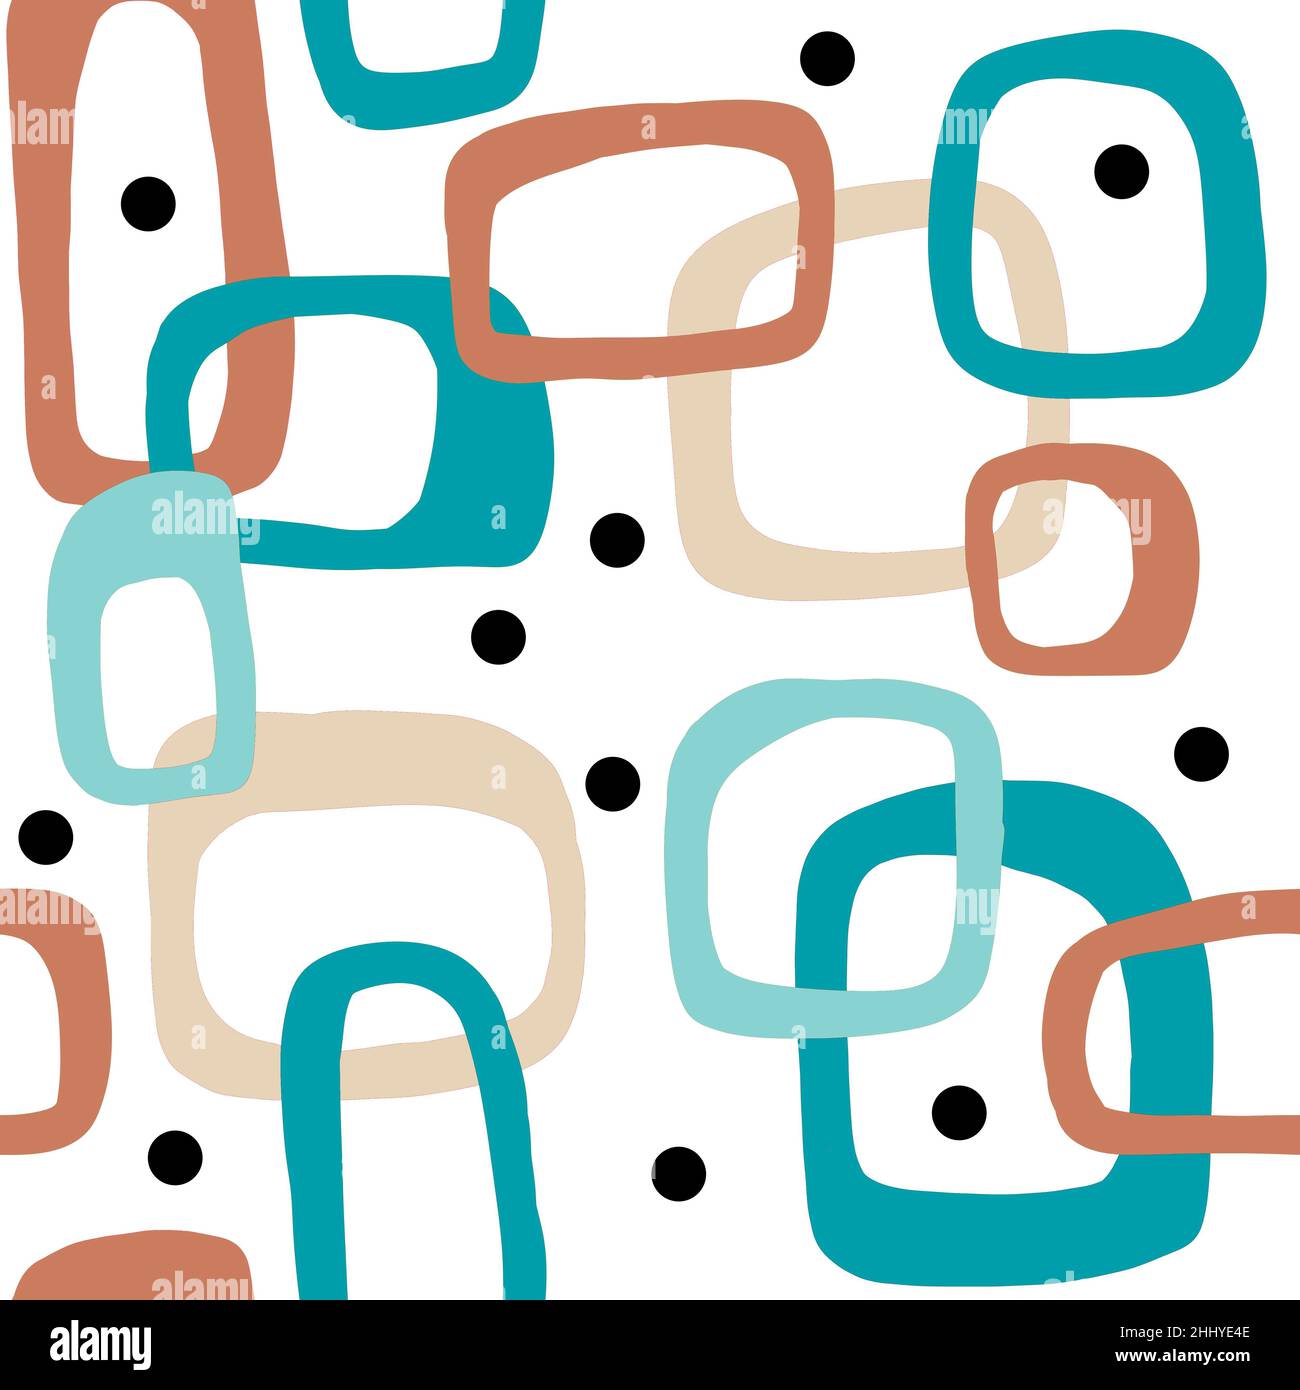 Seamless hand drawn mid century modern pattern in beige blue turquoise  black white colors. Retro vintage